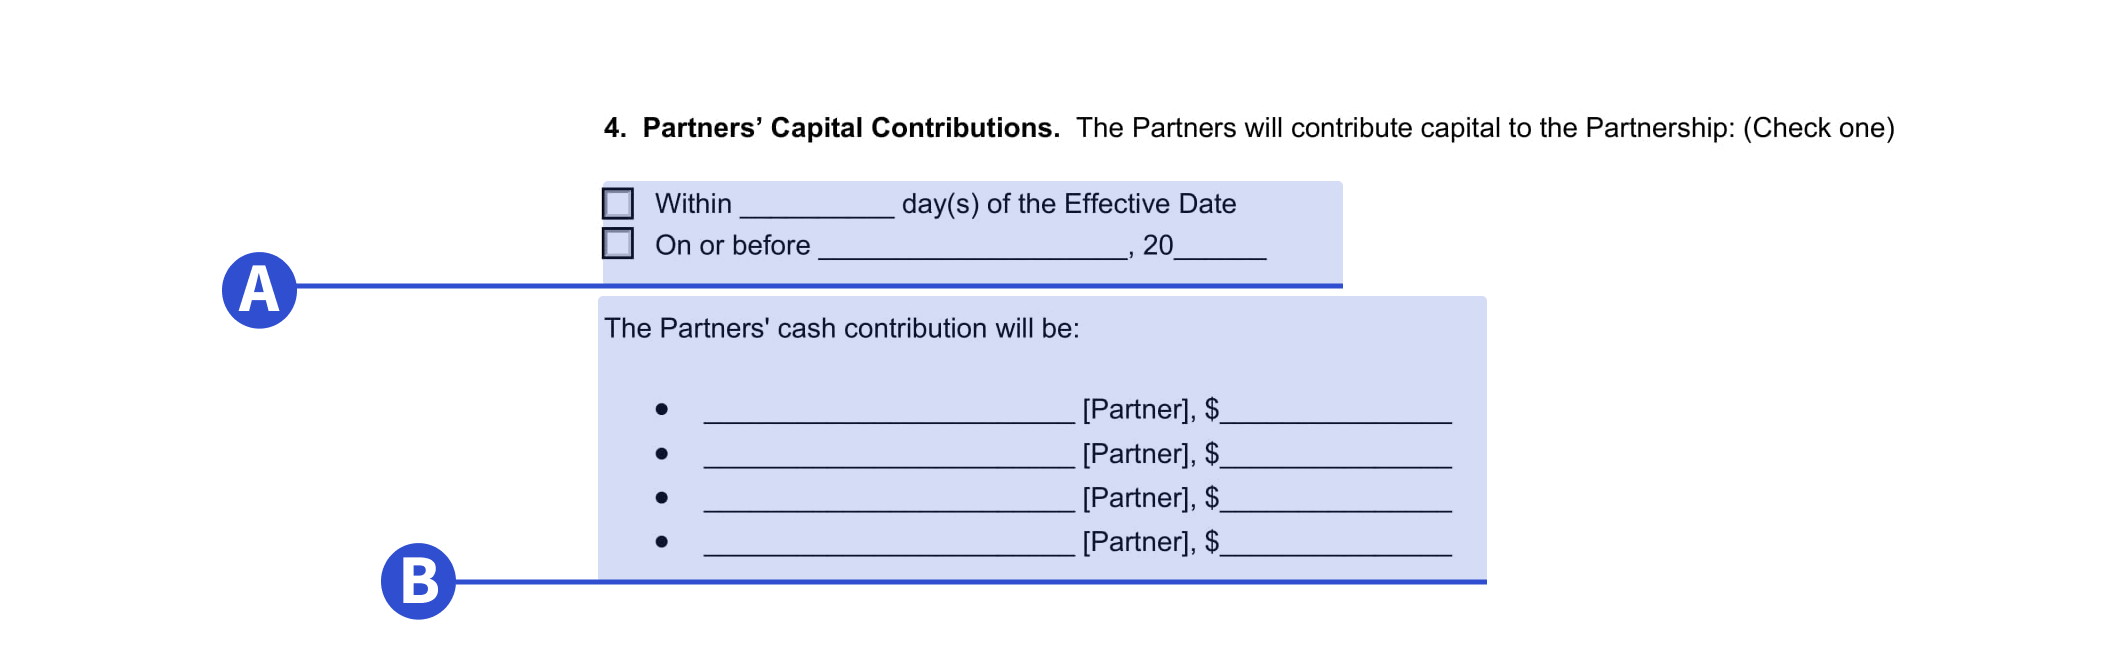 An example of where to include partners' capital contributions in our partnership agreement template.